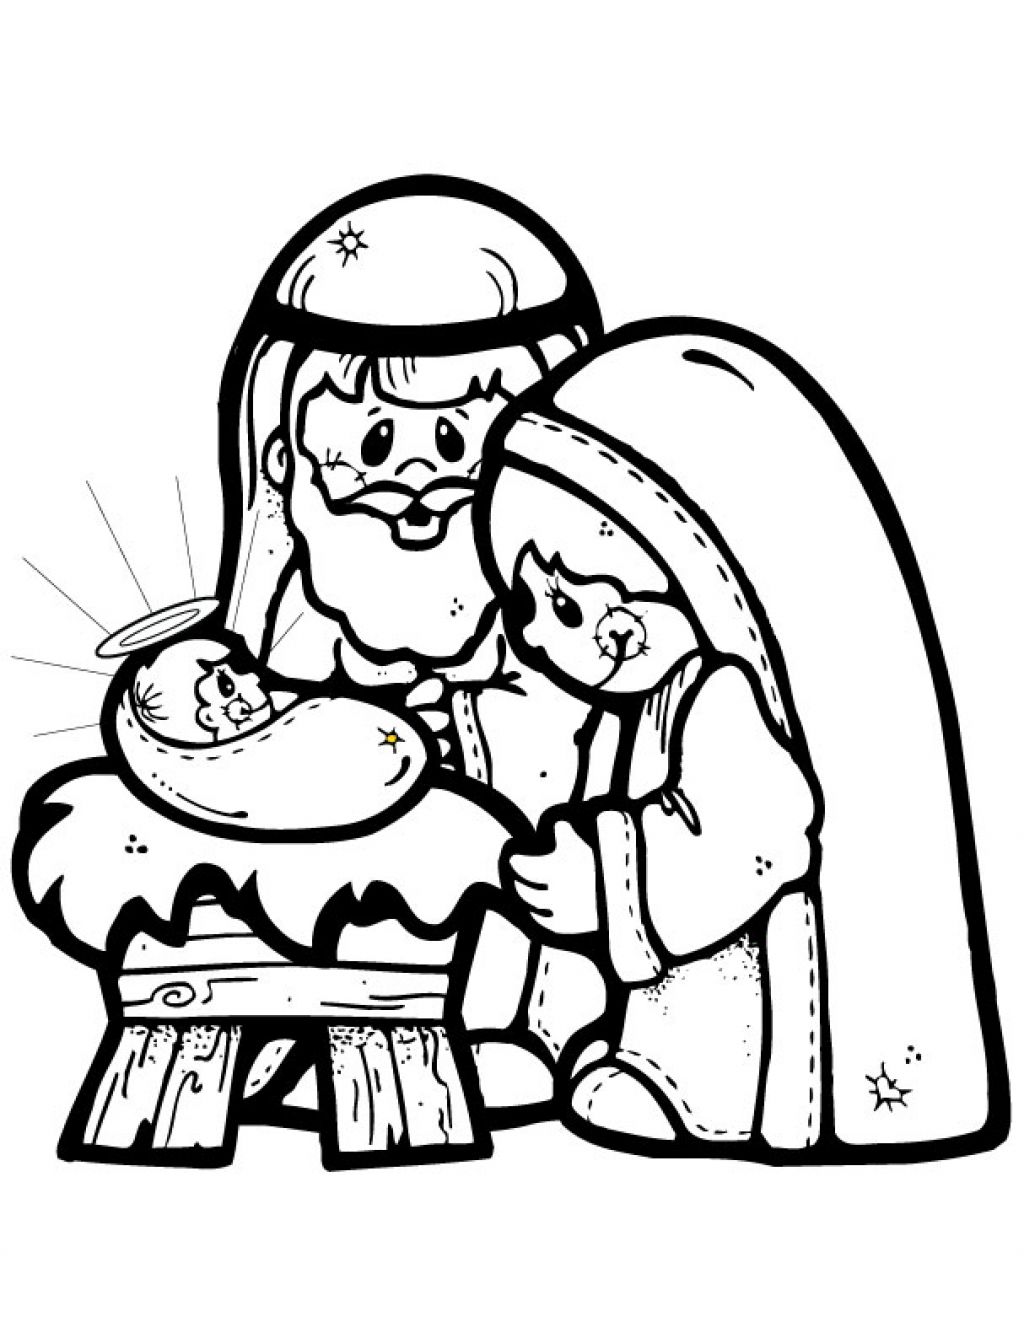 Joseph Mary Baby Jesus Coloring Page Source Fxy Nativity